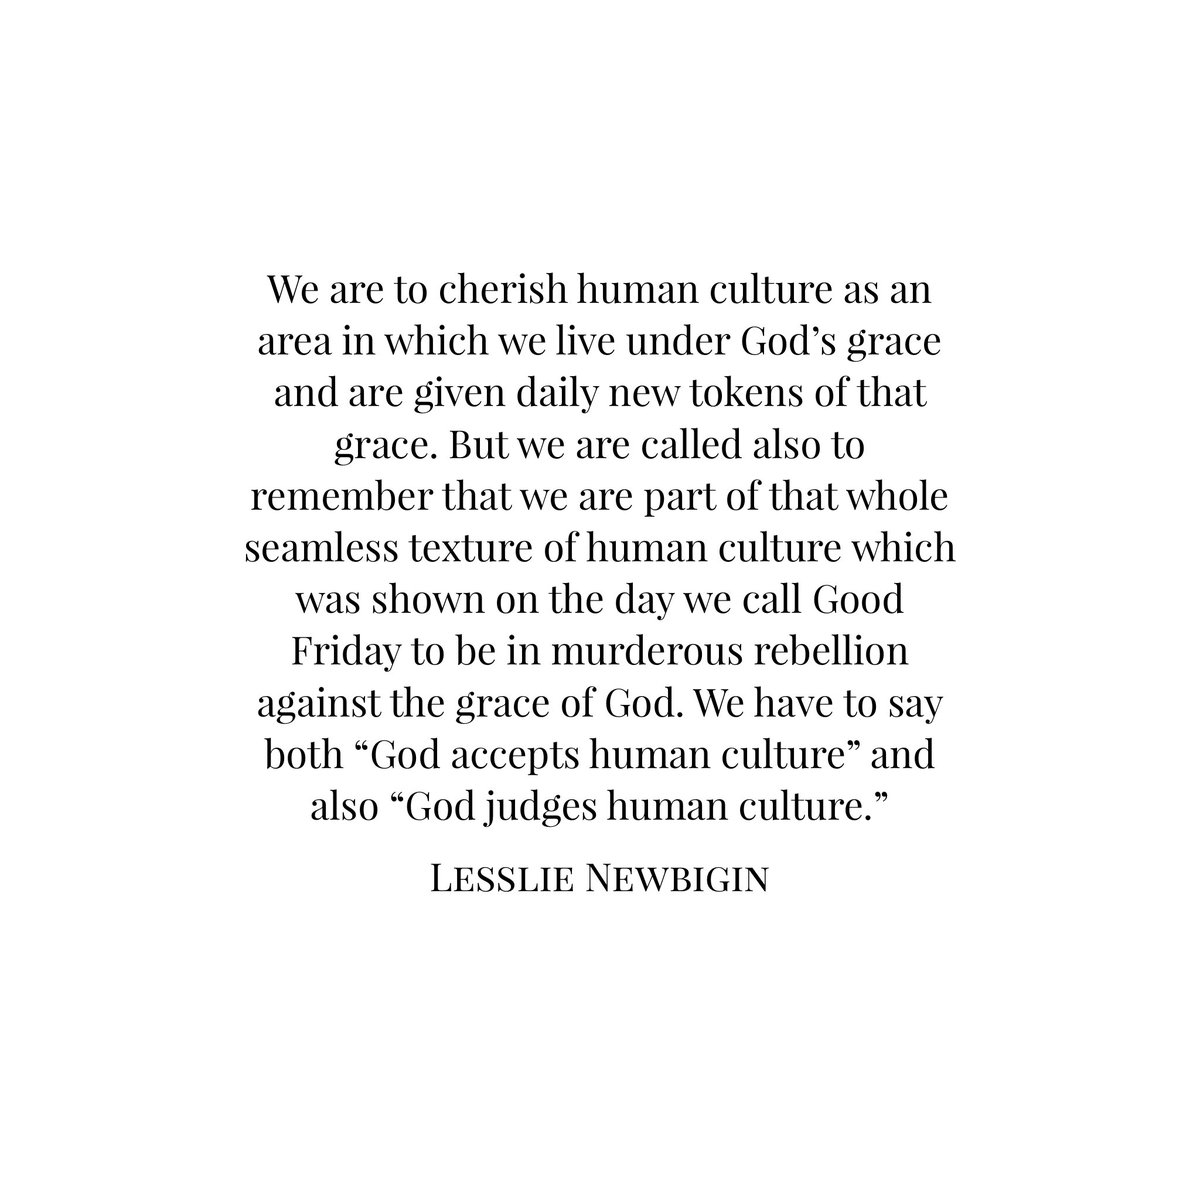 We can’t allow for a cultural contouring—a smoothing out—of the gospel’s jagged edges, the points that shred the fabric of white respectability. Theologian Lesslie Newbigin says it this way: “We have to say both ‘God accepts human culture’ and ‘God judges human culture’.”